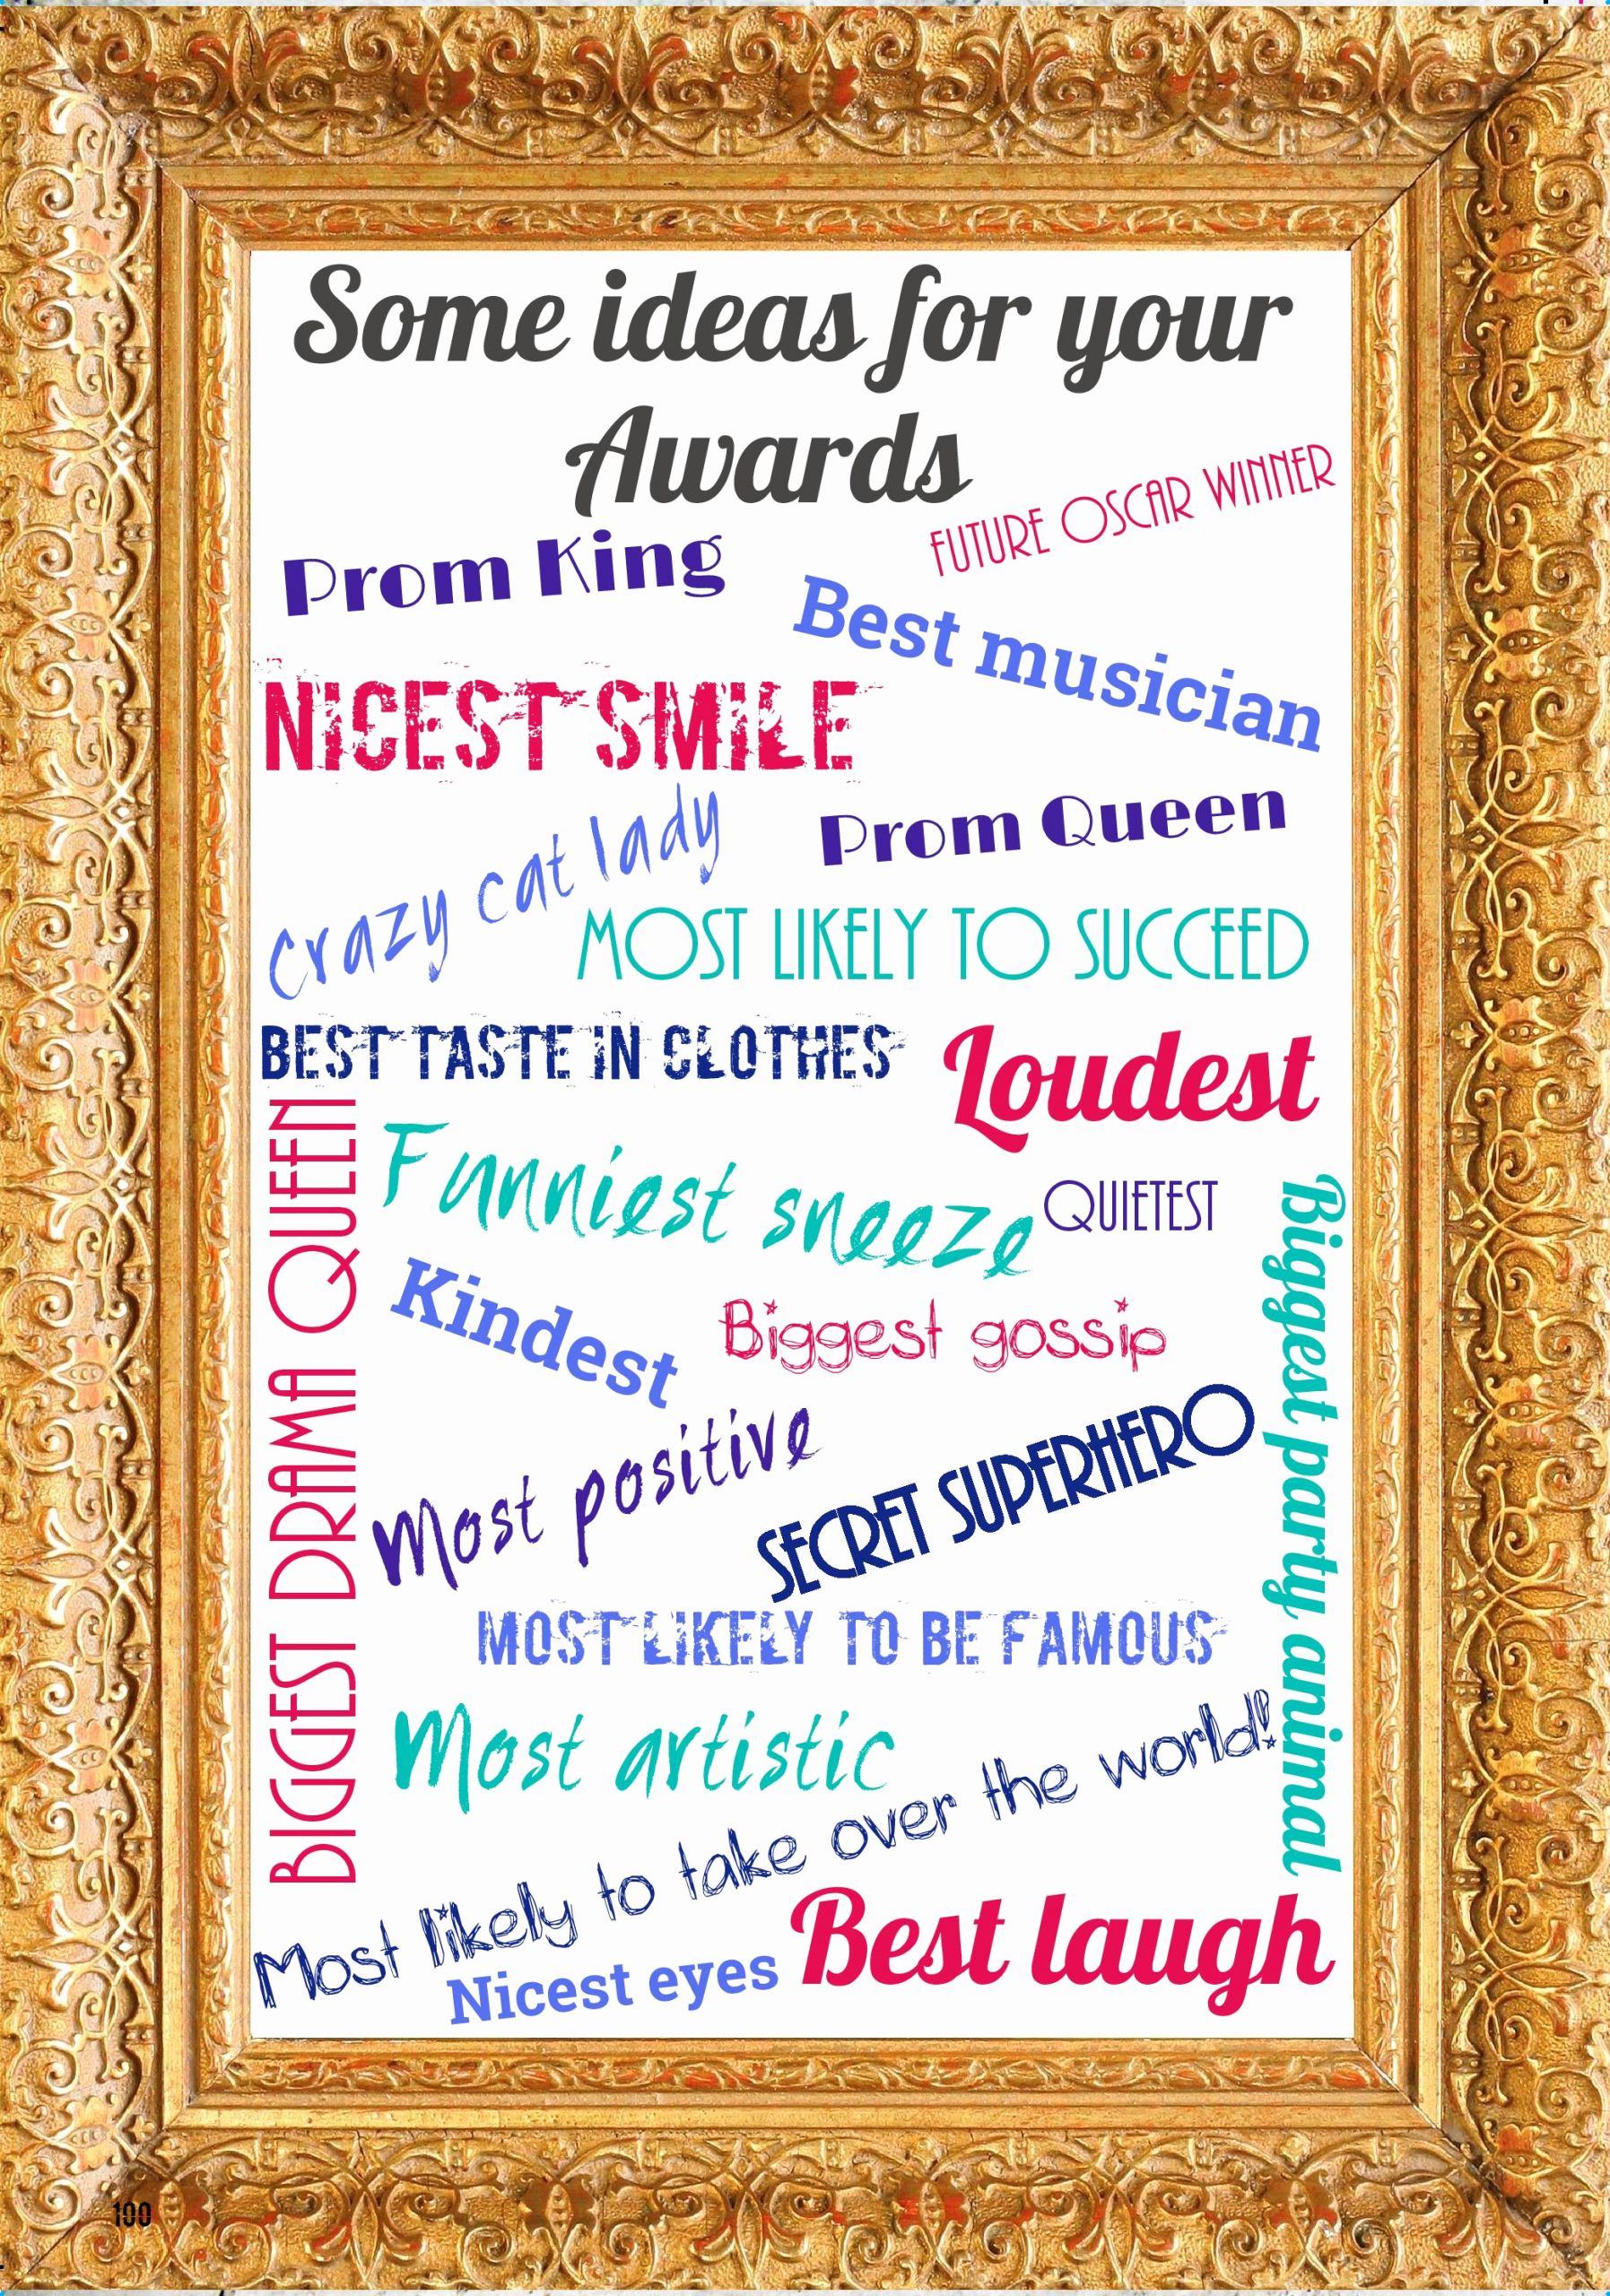 Fun Award Ideas for Students Awesome Ideas for Awards Categories – Leavers Yearbooks From £9 99